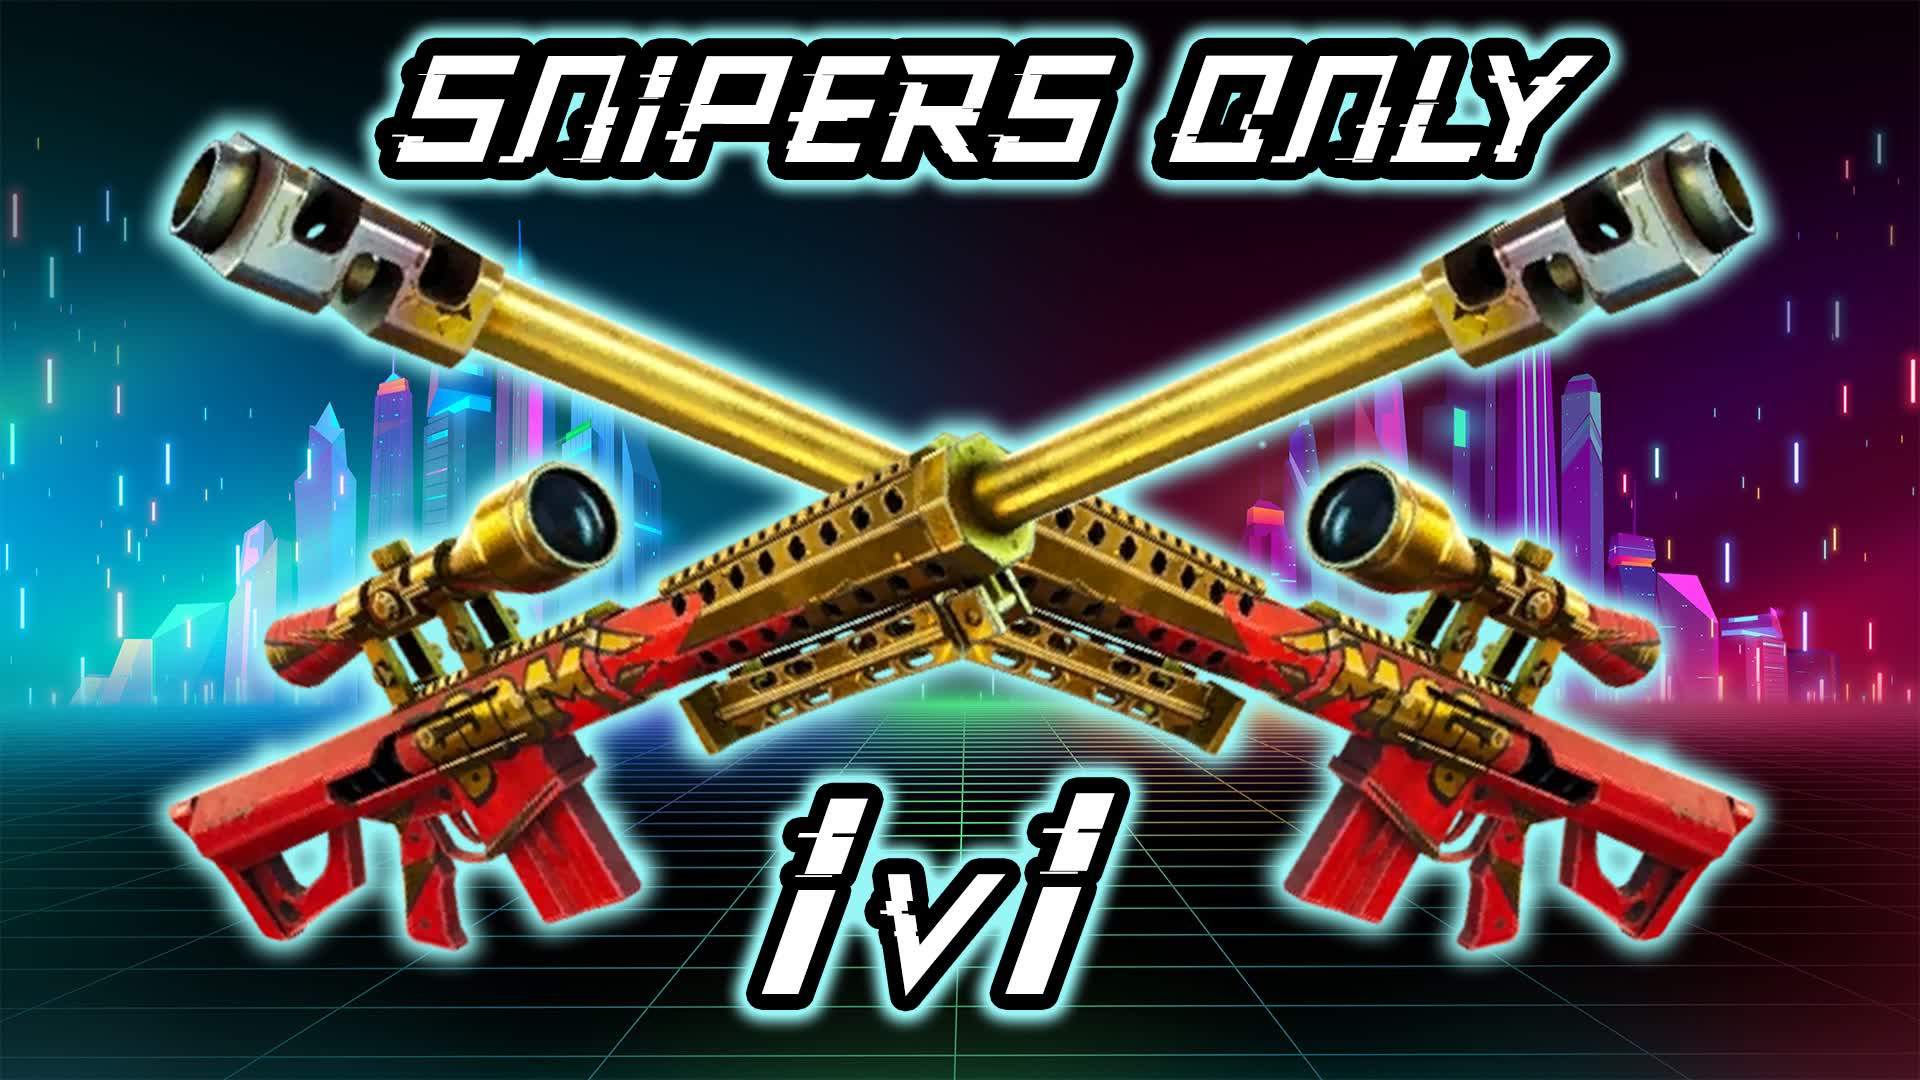 🎯Snipers Only 1v1🎯 - Fortnite Creative Map Code - Dropnite